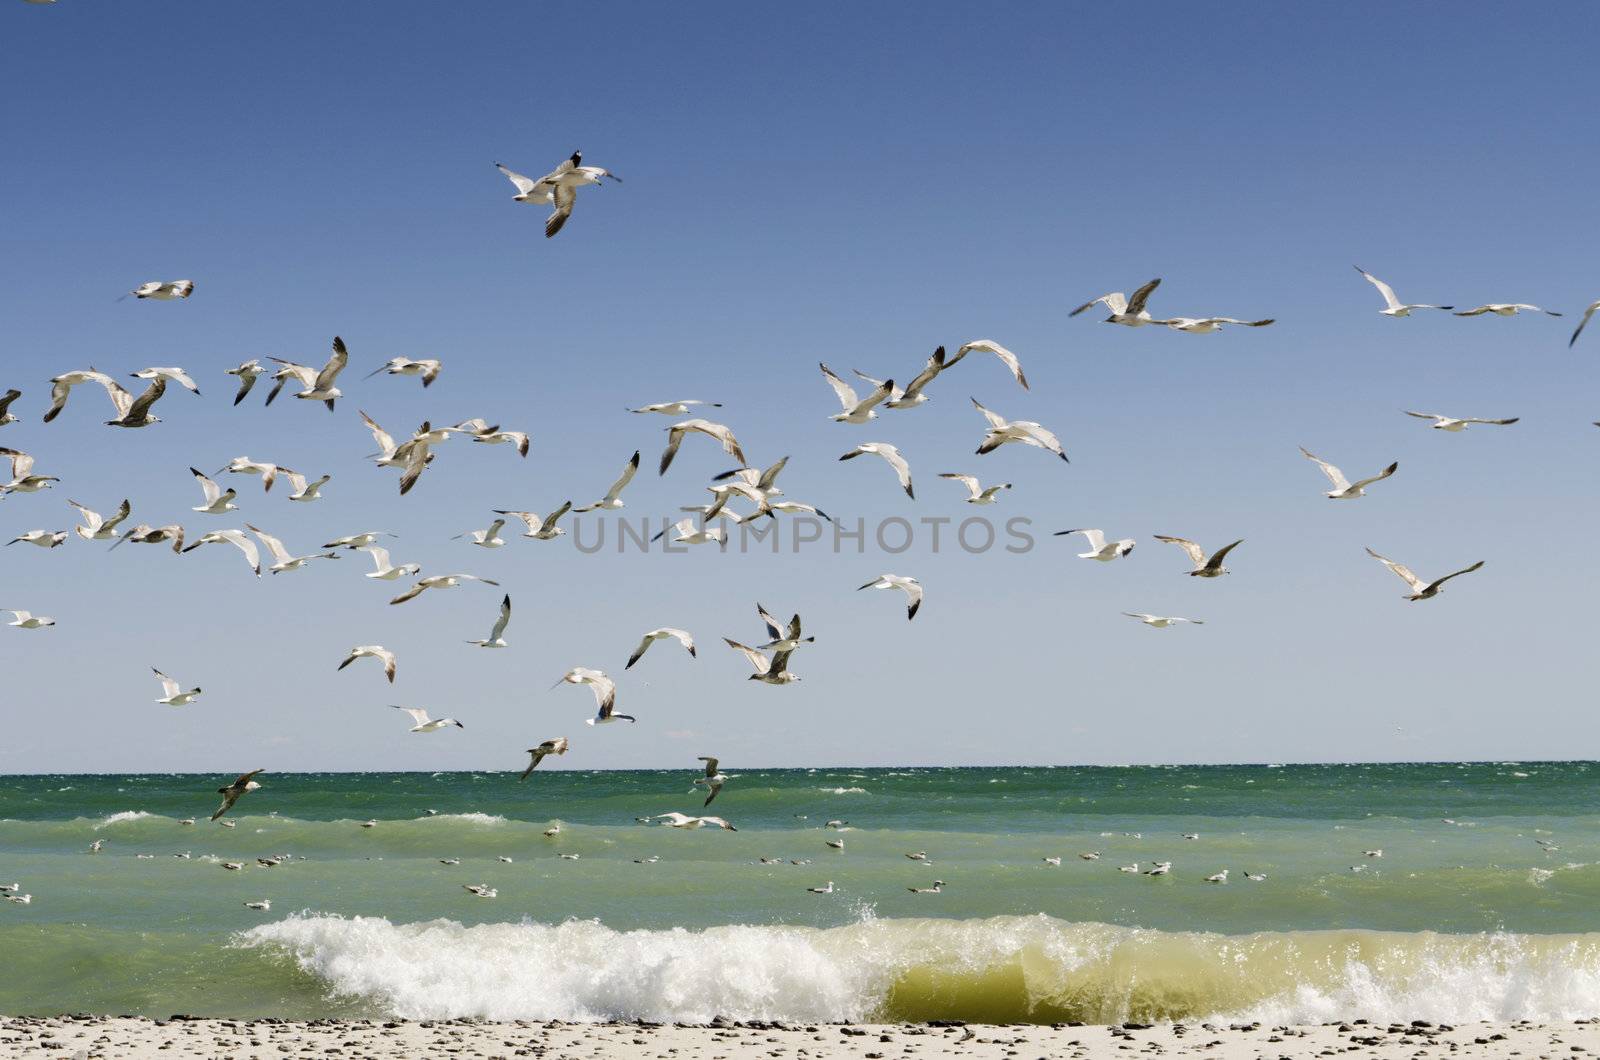 Waves crashing on the beach with the seagulls flying by on a blue sky